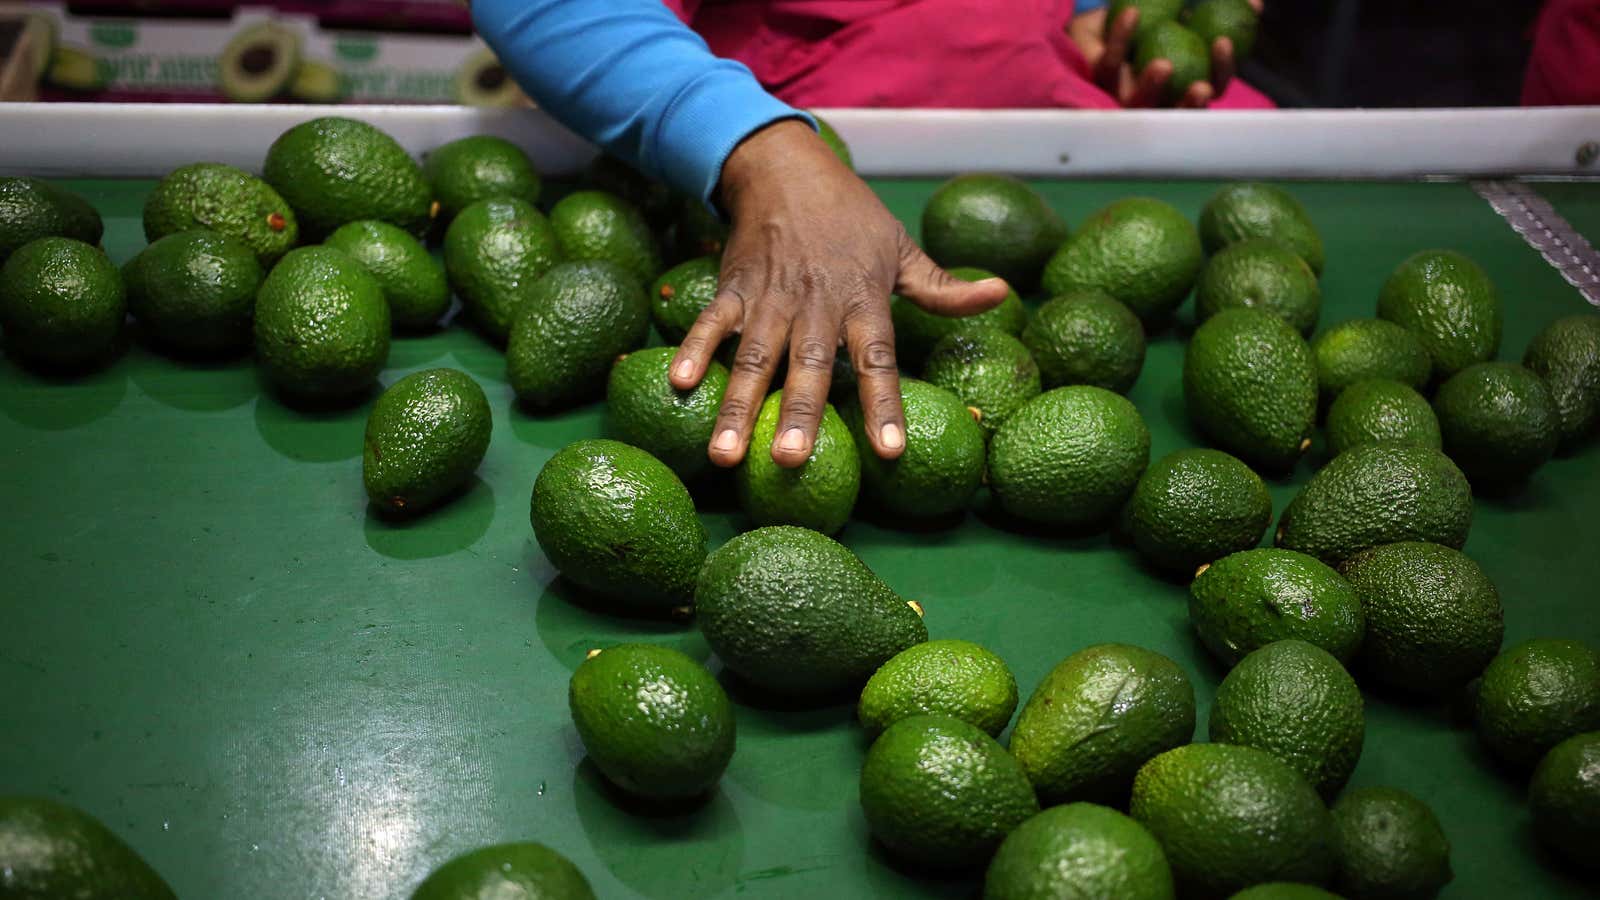 Mexico is the dominant producer of avocados.